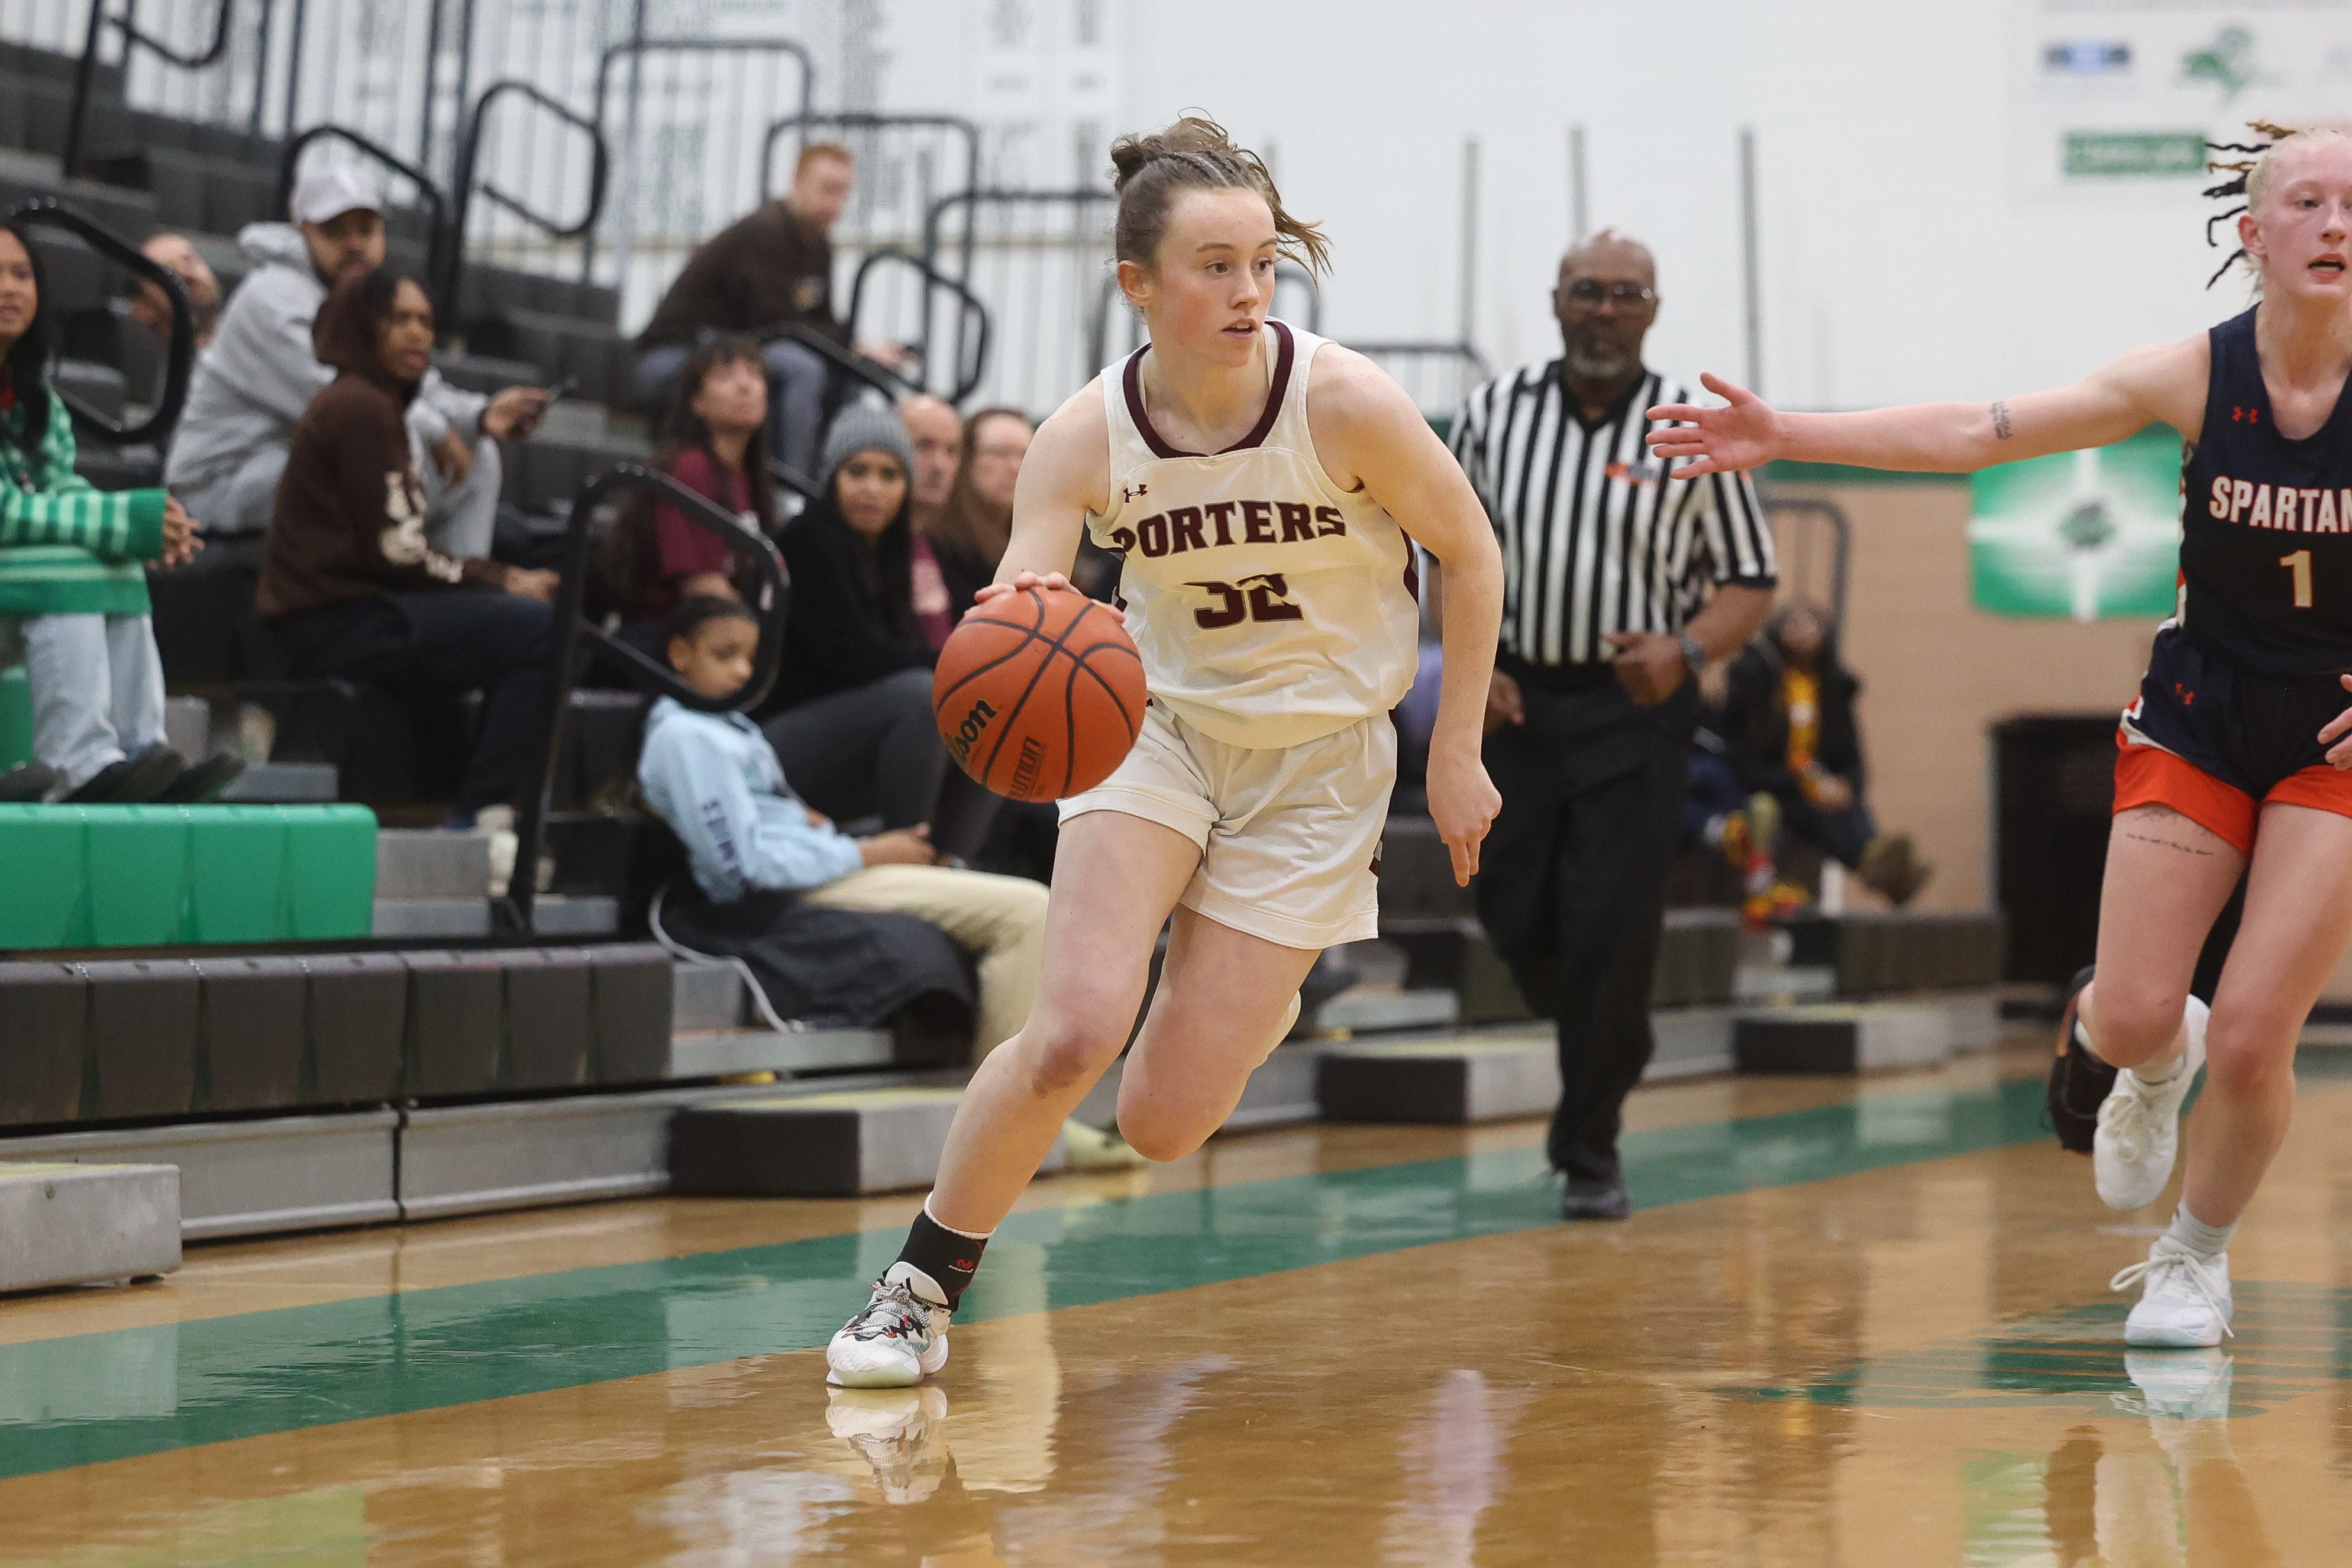 Lockport’s Lucy Hynes looks to make a play against Romeoville in the Oak Lawn Holiday Tournament championship on Saturday, Dec.16th in Oak Lawn.